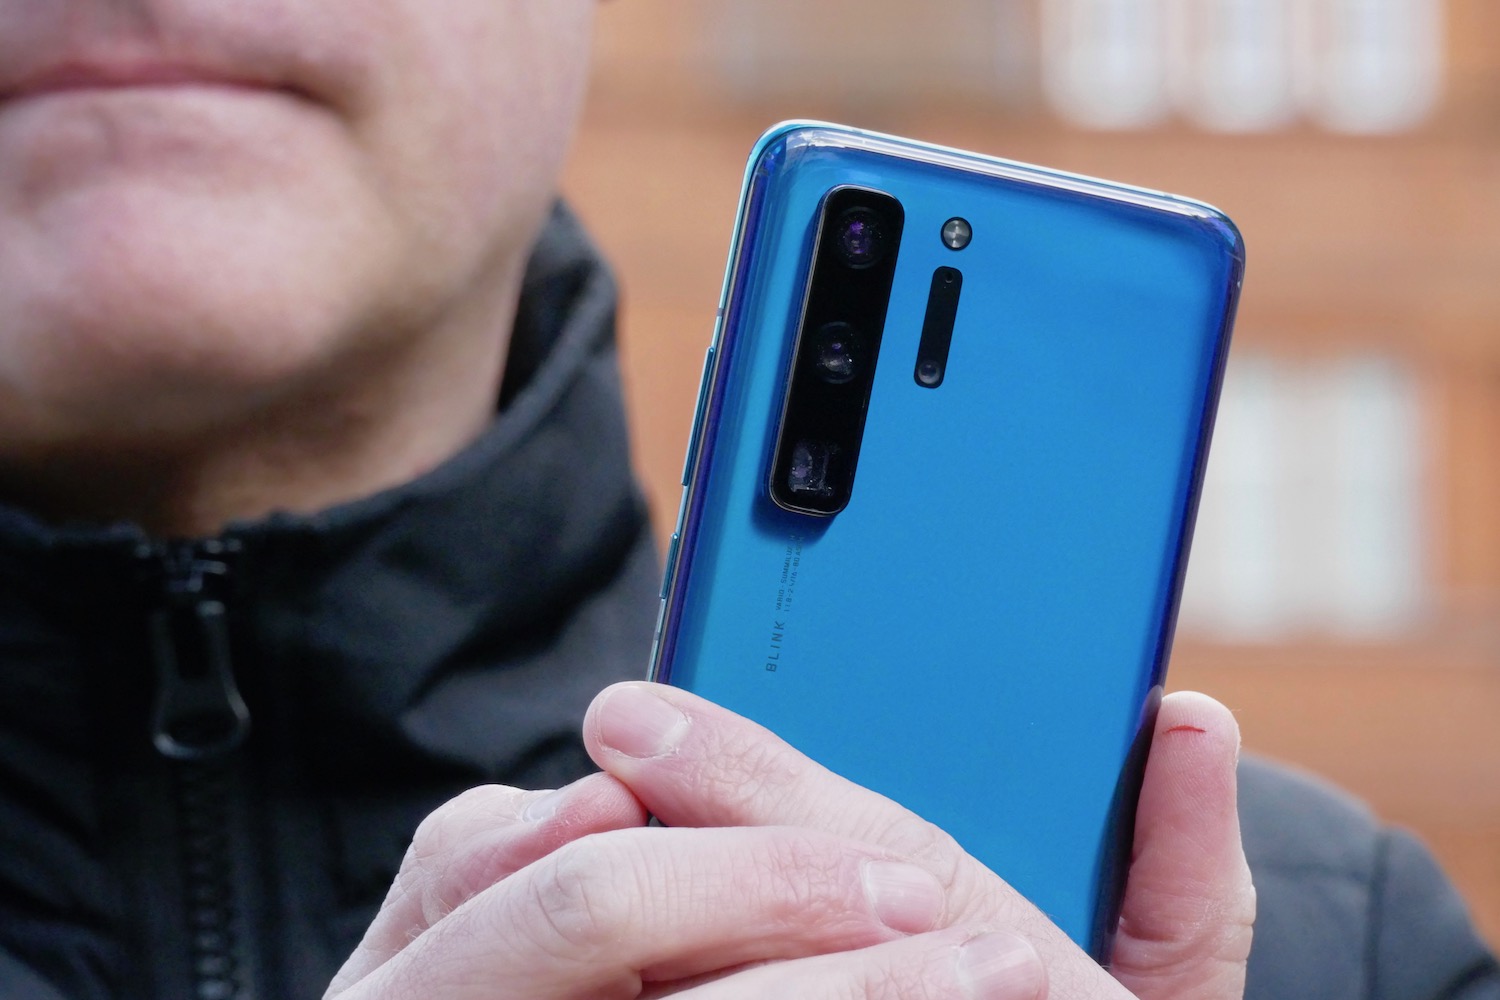 Huawei's P40 Pro is coming in March, and it won't have Google services